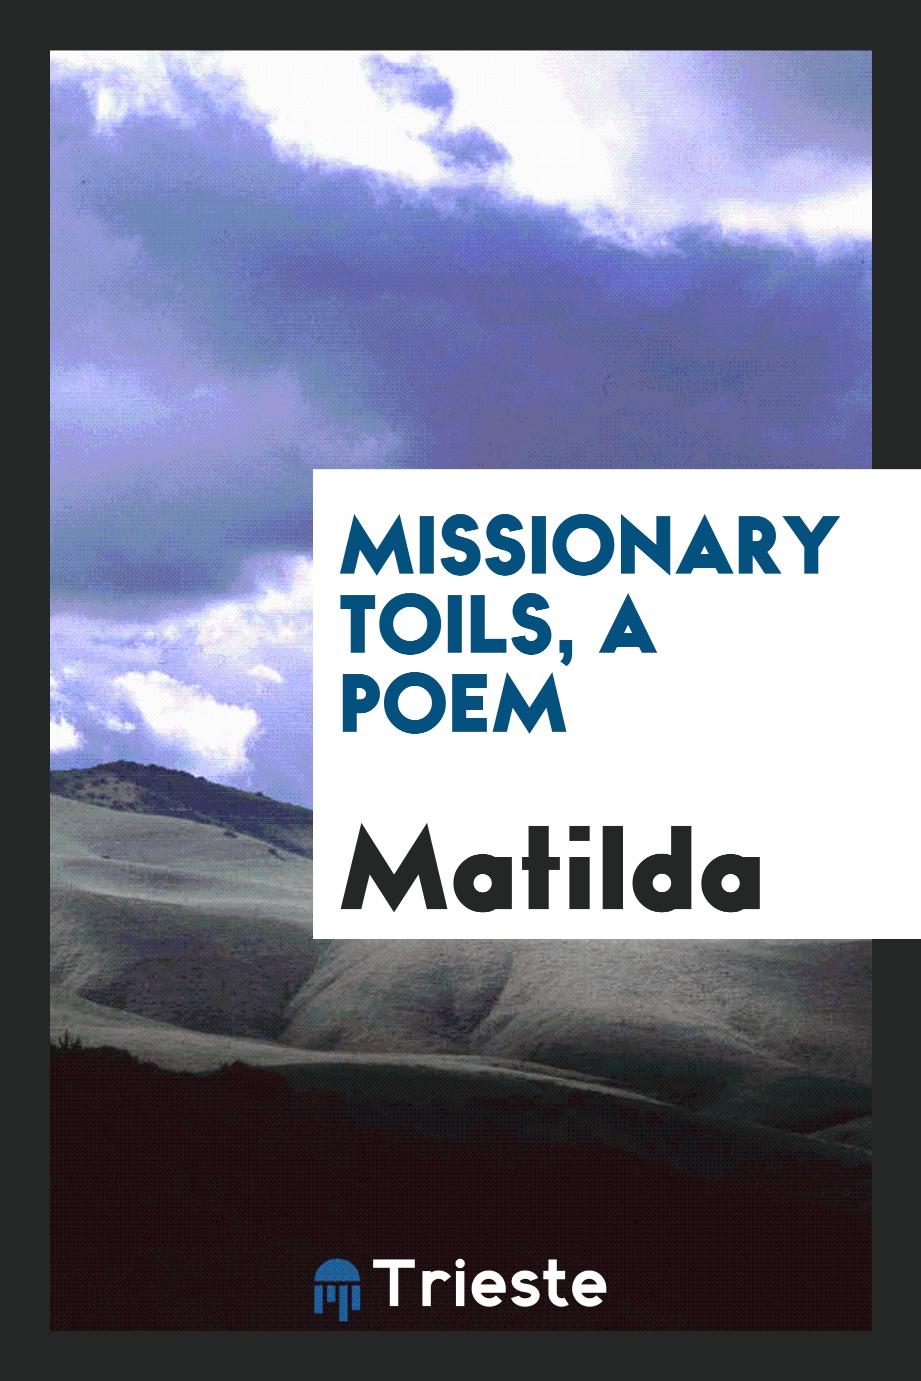 Missionary toils, a poem